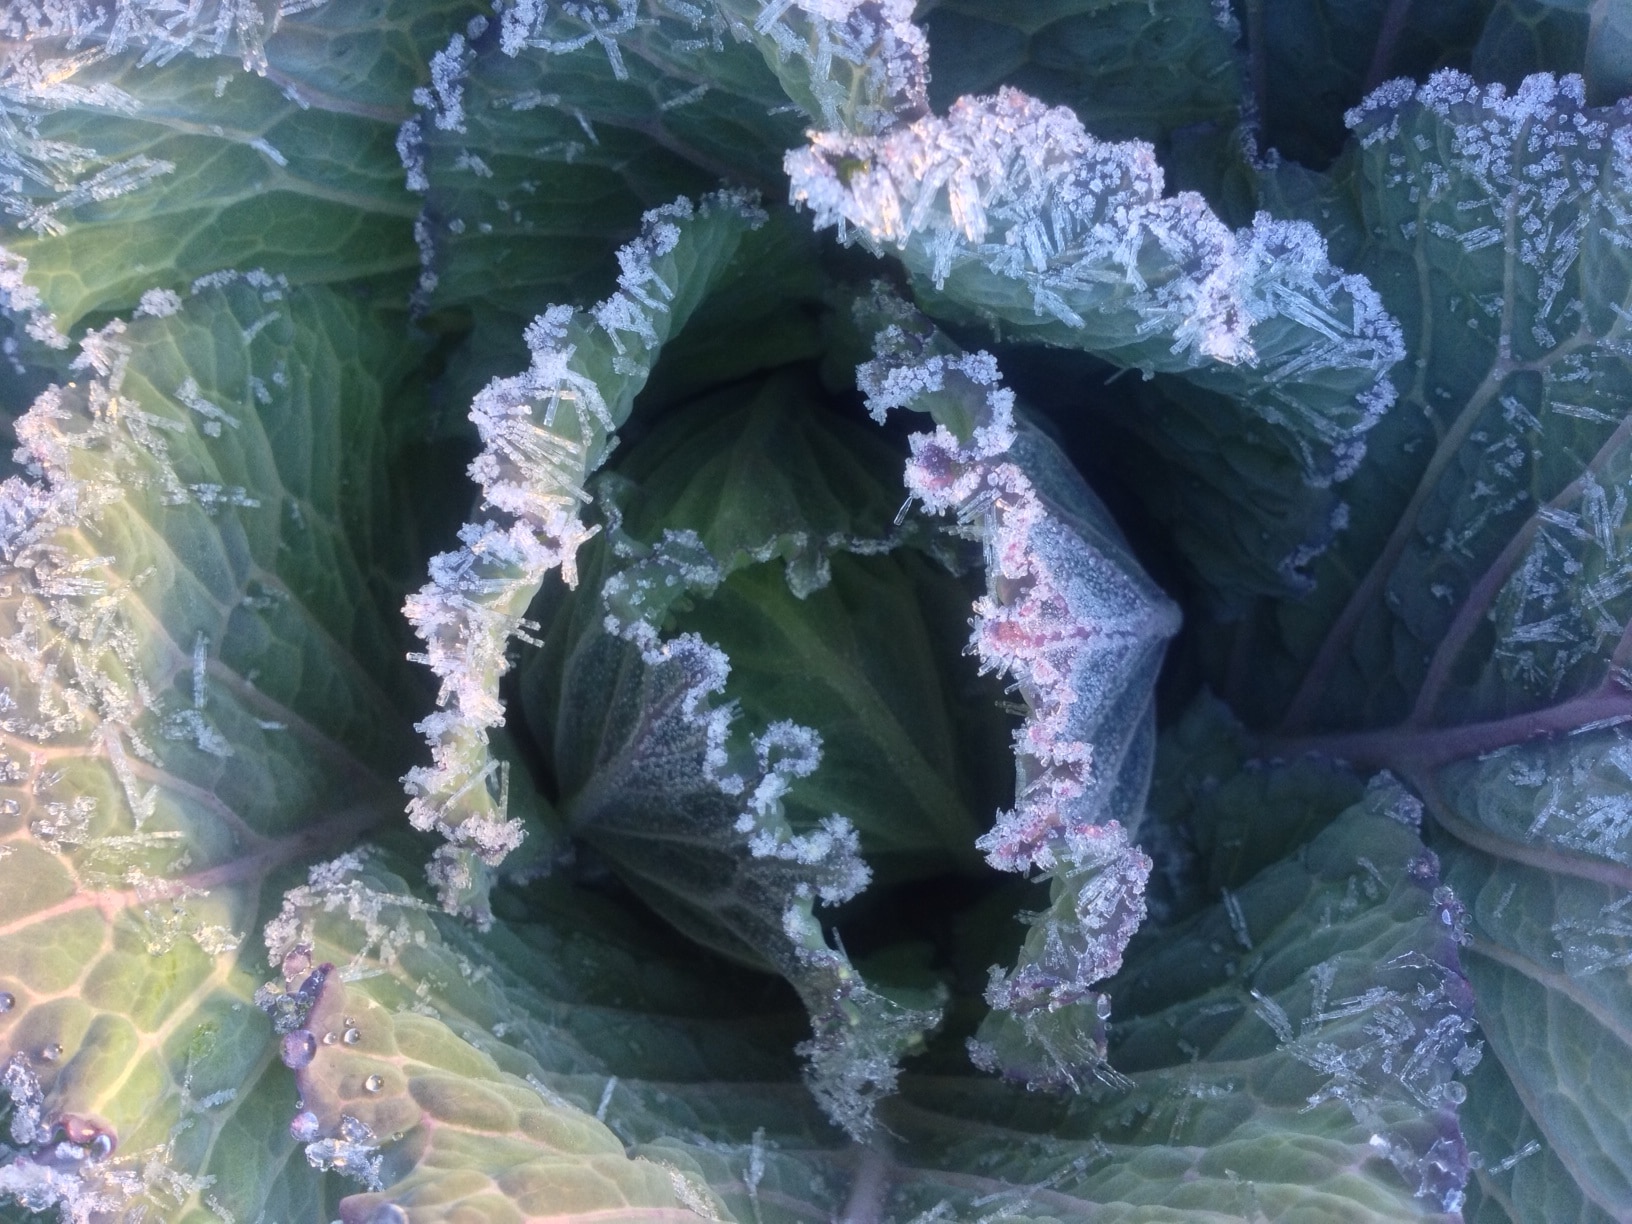 Icy Cabbage